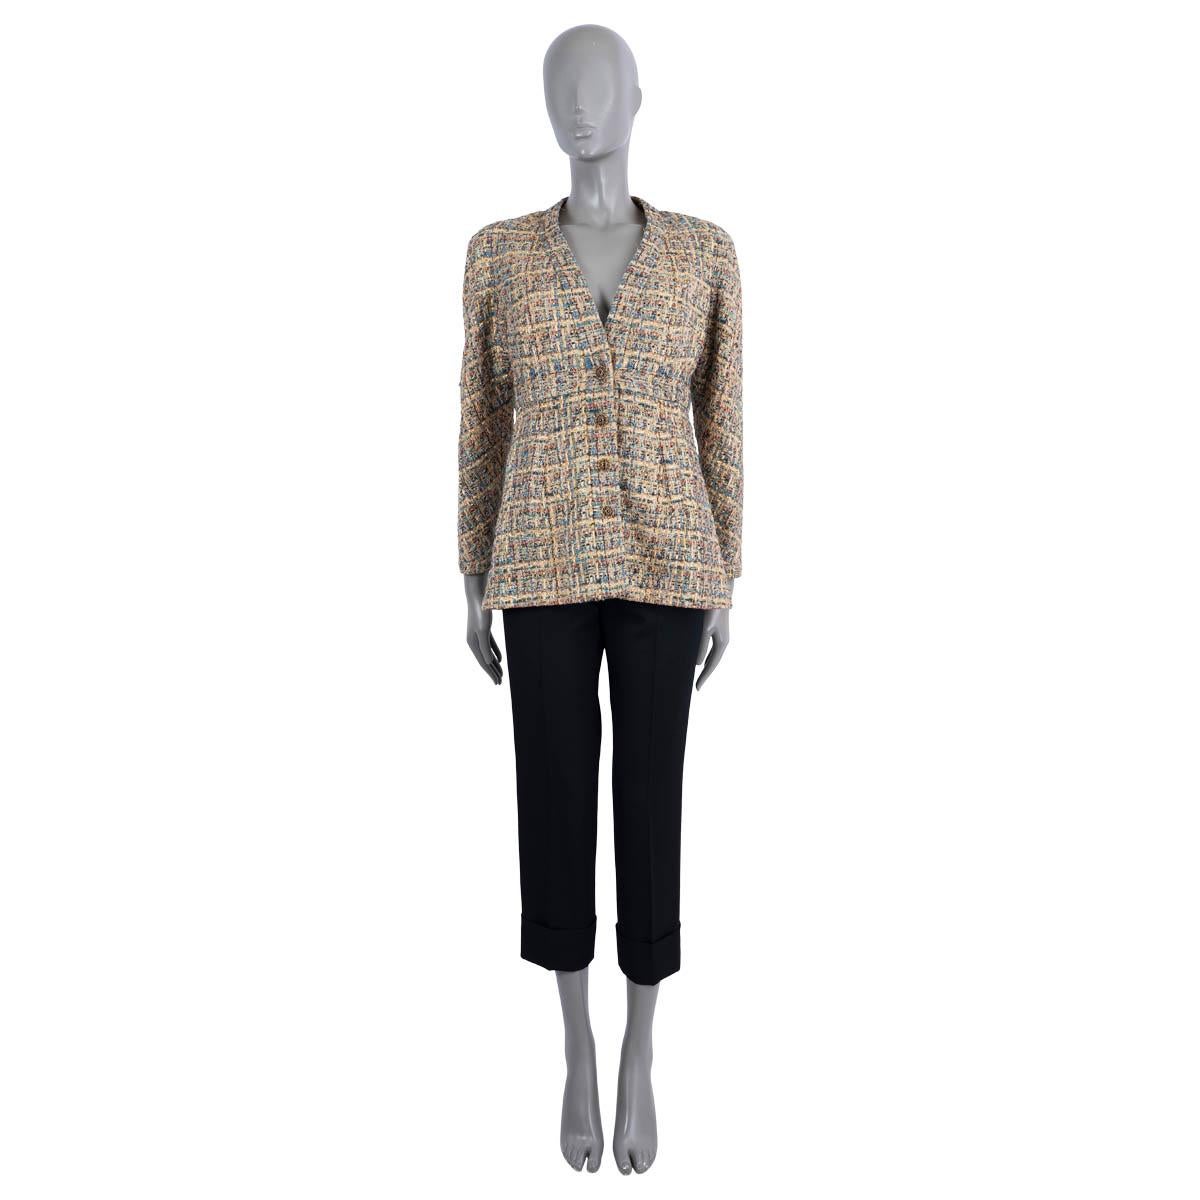 100% authentic Chanel lurex tweed jacket in mustard and multicolor polyester (36%), acrylic (16%), viscose (16%), cotton (9%), acetate (6%), wool (5%), polyamide (5%), alpaca (4%) and other fibers (3%). Features a V-neck, jeweled Gripox buttons and